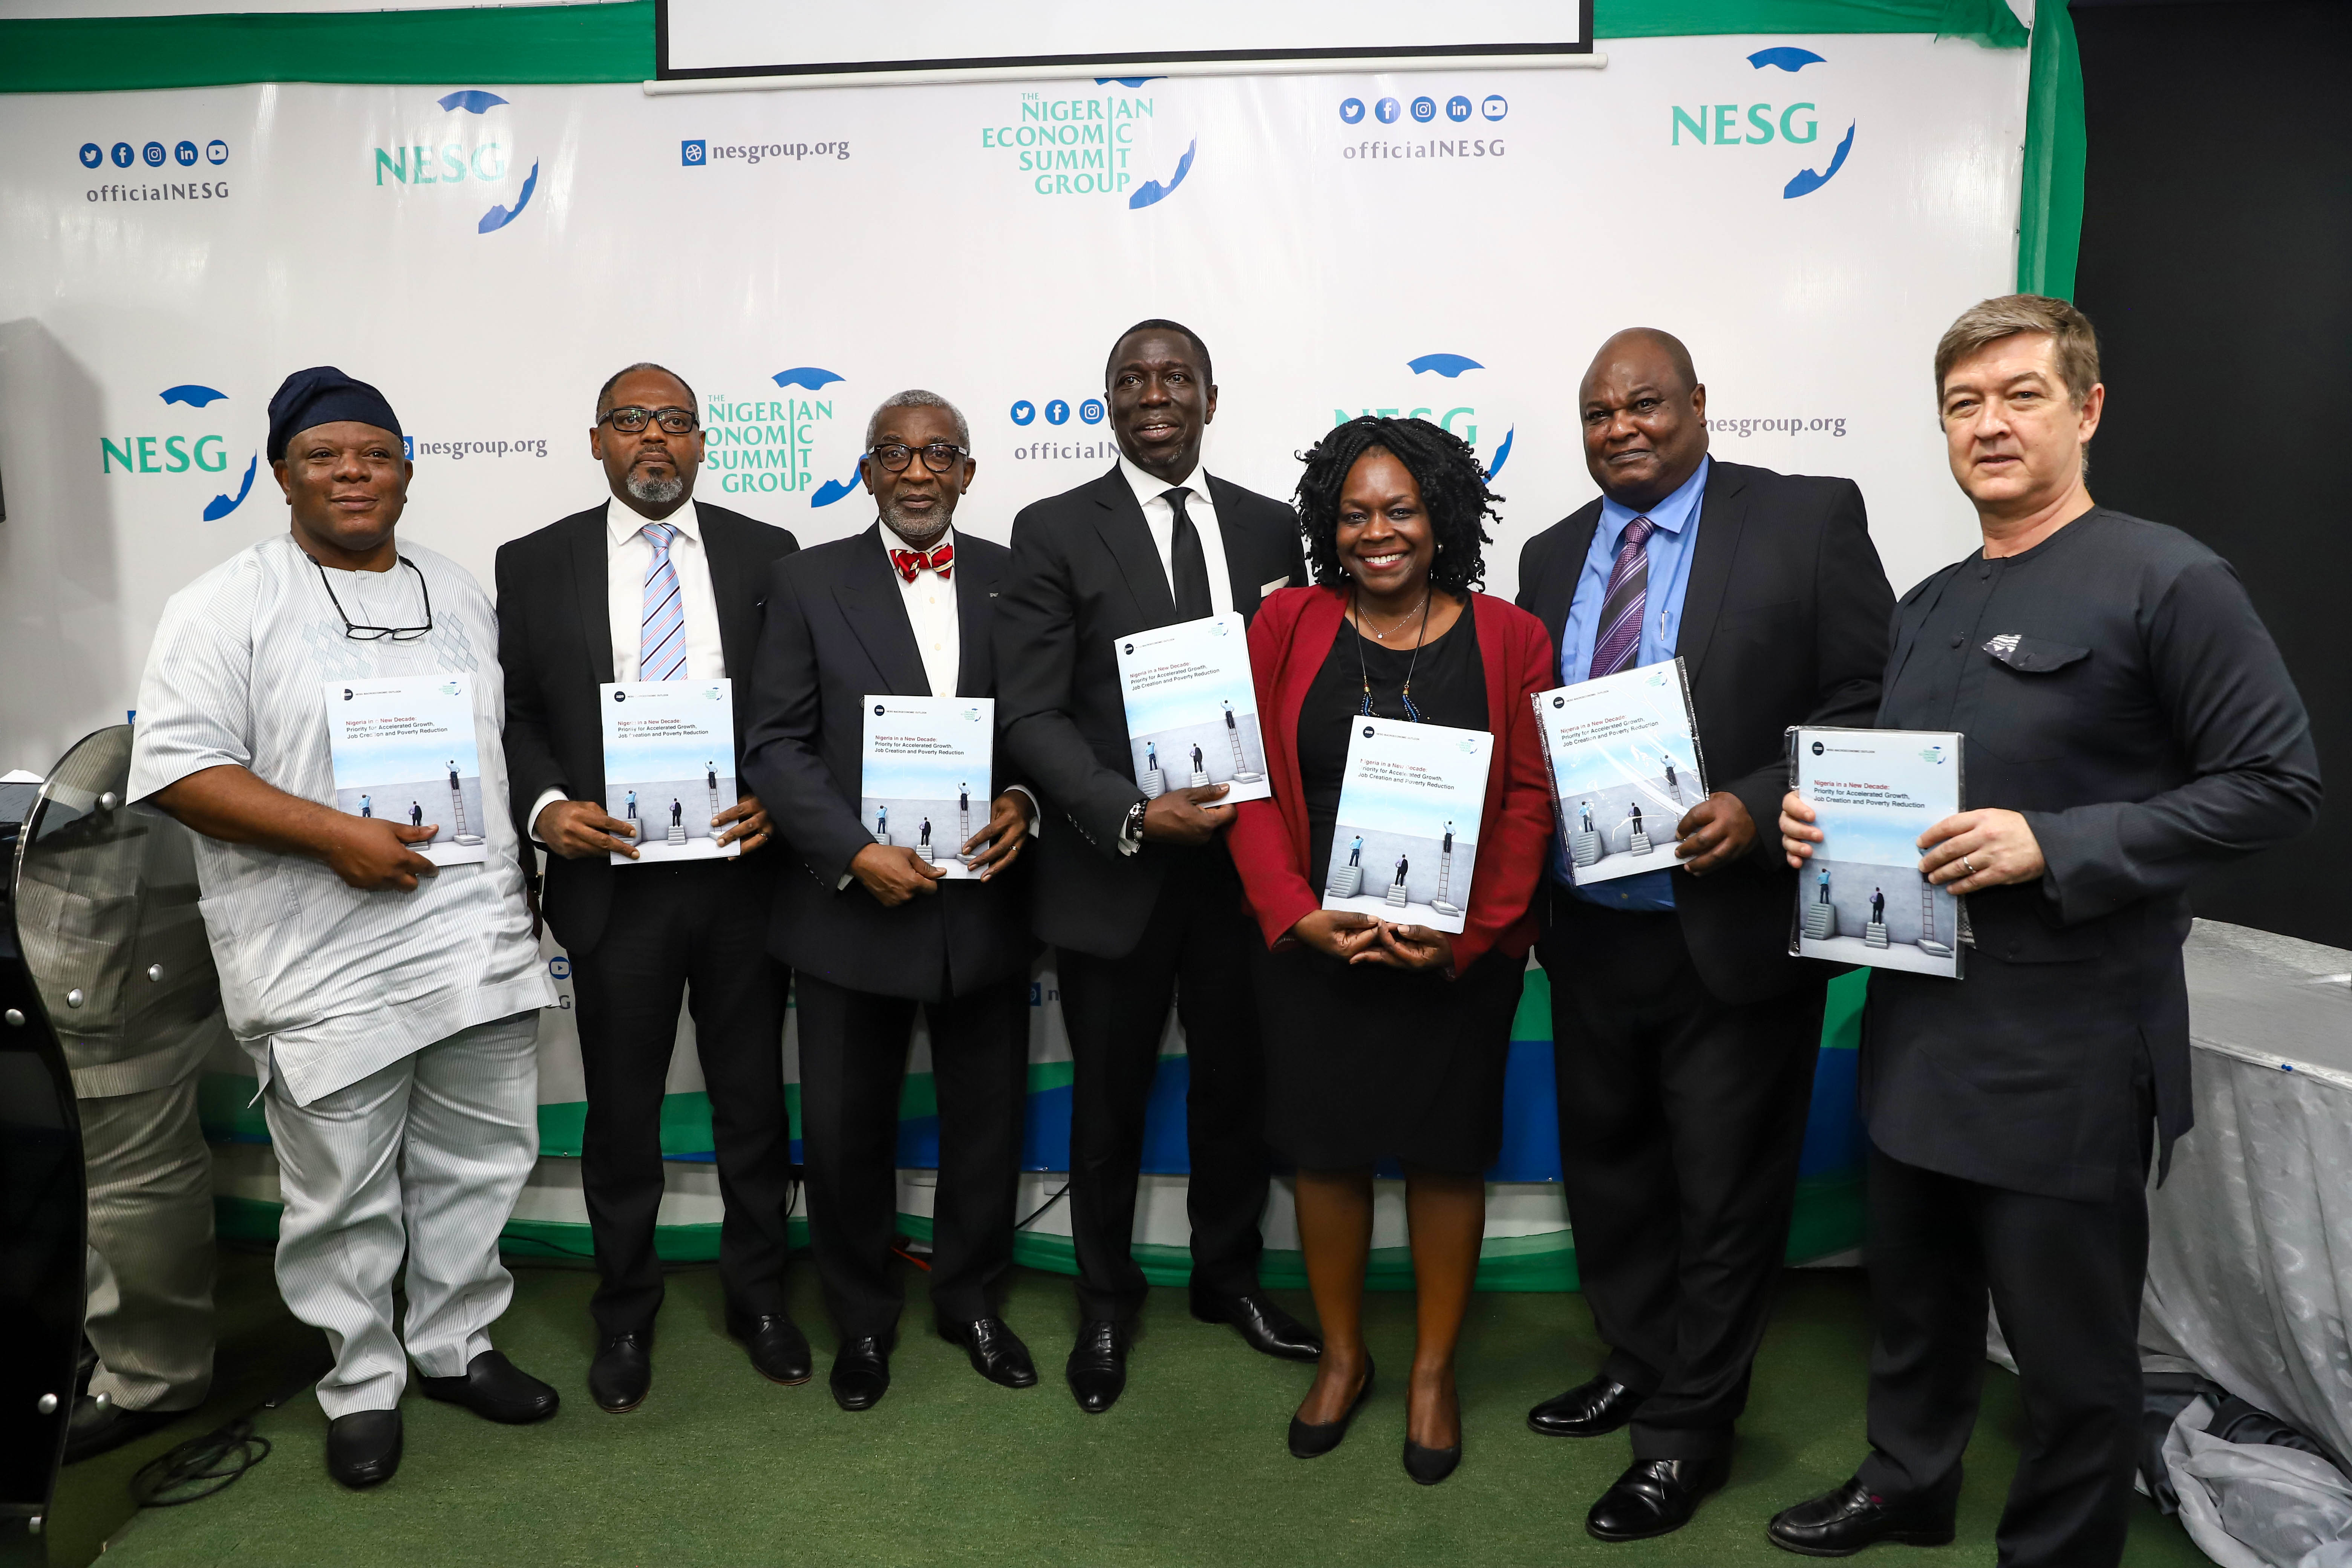 NESG 2020 Macroeconomic Outlook Report: Nigeria in the New Decade, The Nigerian Economic Summit Group, The NESG, think-tank, think, tank, nigeria, policy, nesg, africa, number one think in africa, best think in nigeria, the best think tank in africa, top 10 think tanks in nigeria, think tank nigeria, economy, business, PPD, public, private, dialogue, Nigeria, Nigeria PPD, NIGERIA, PPD